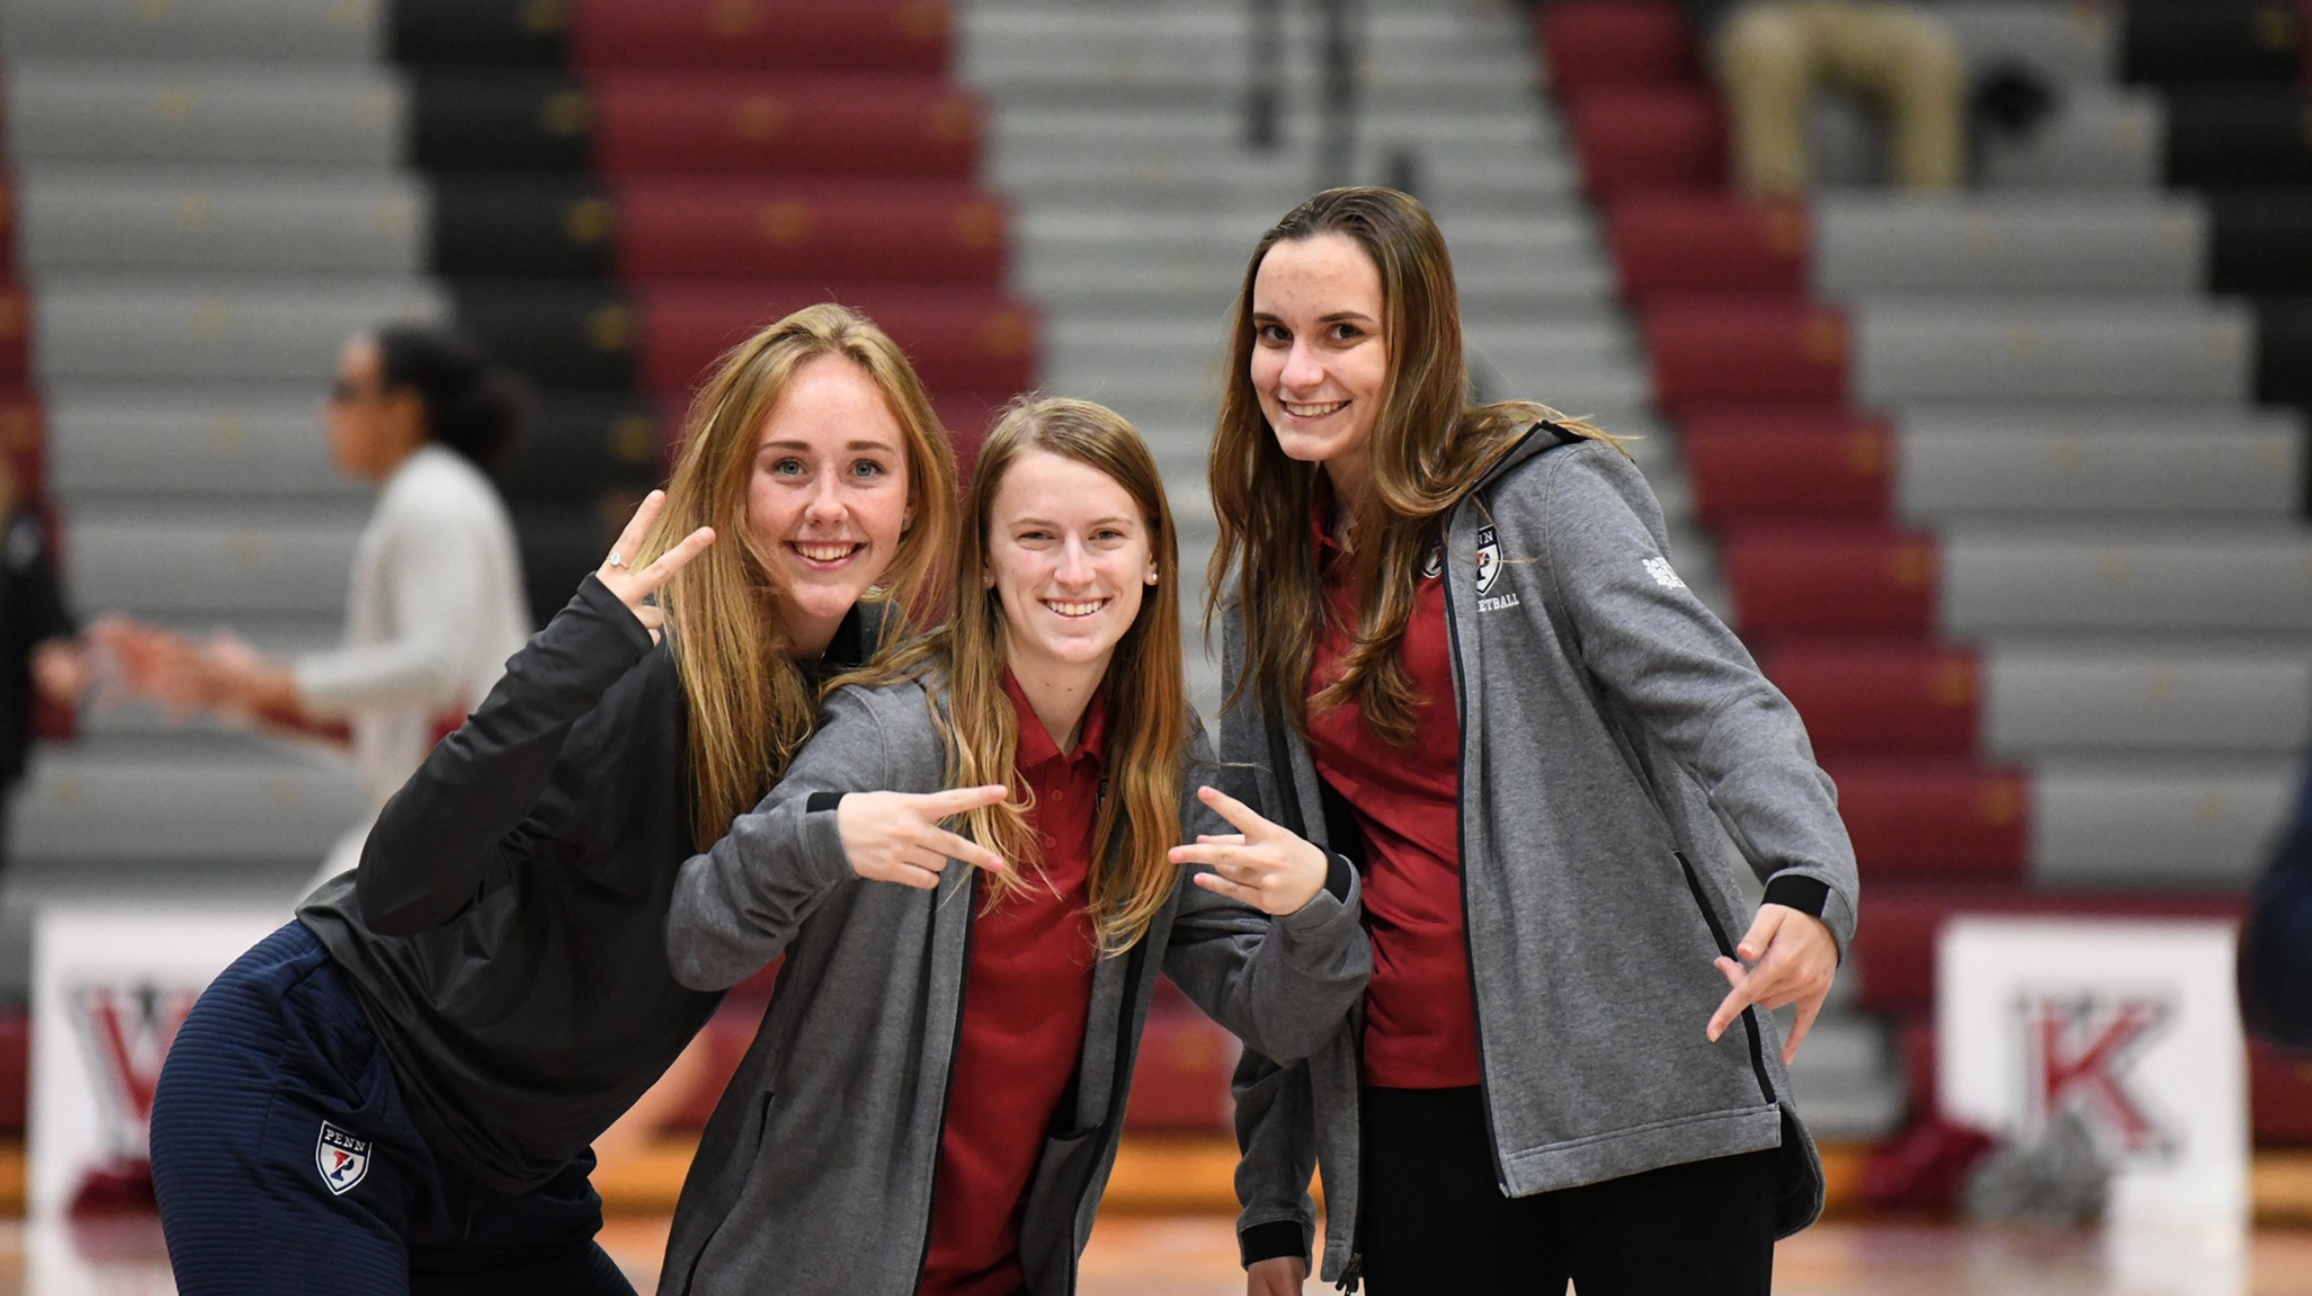 Liz Satter, left, throws up the piece sign while posing with the two women's basketball team managers.